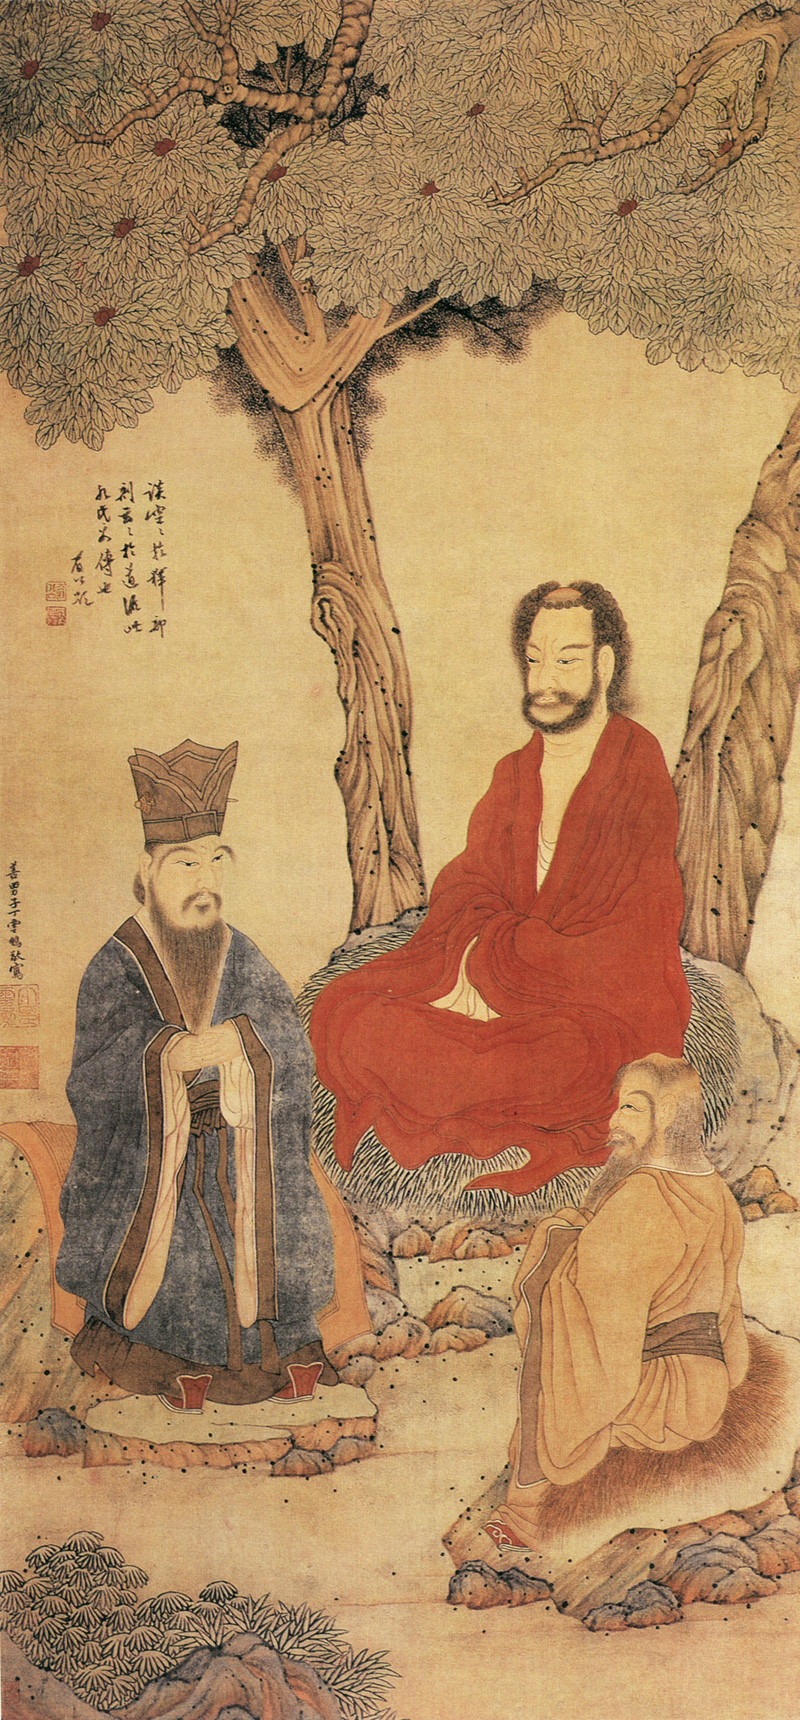 Three sages sit under trees dressed in blue, red, and yellow robes.